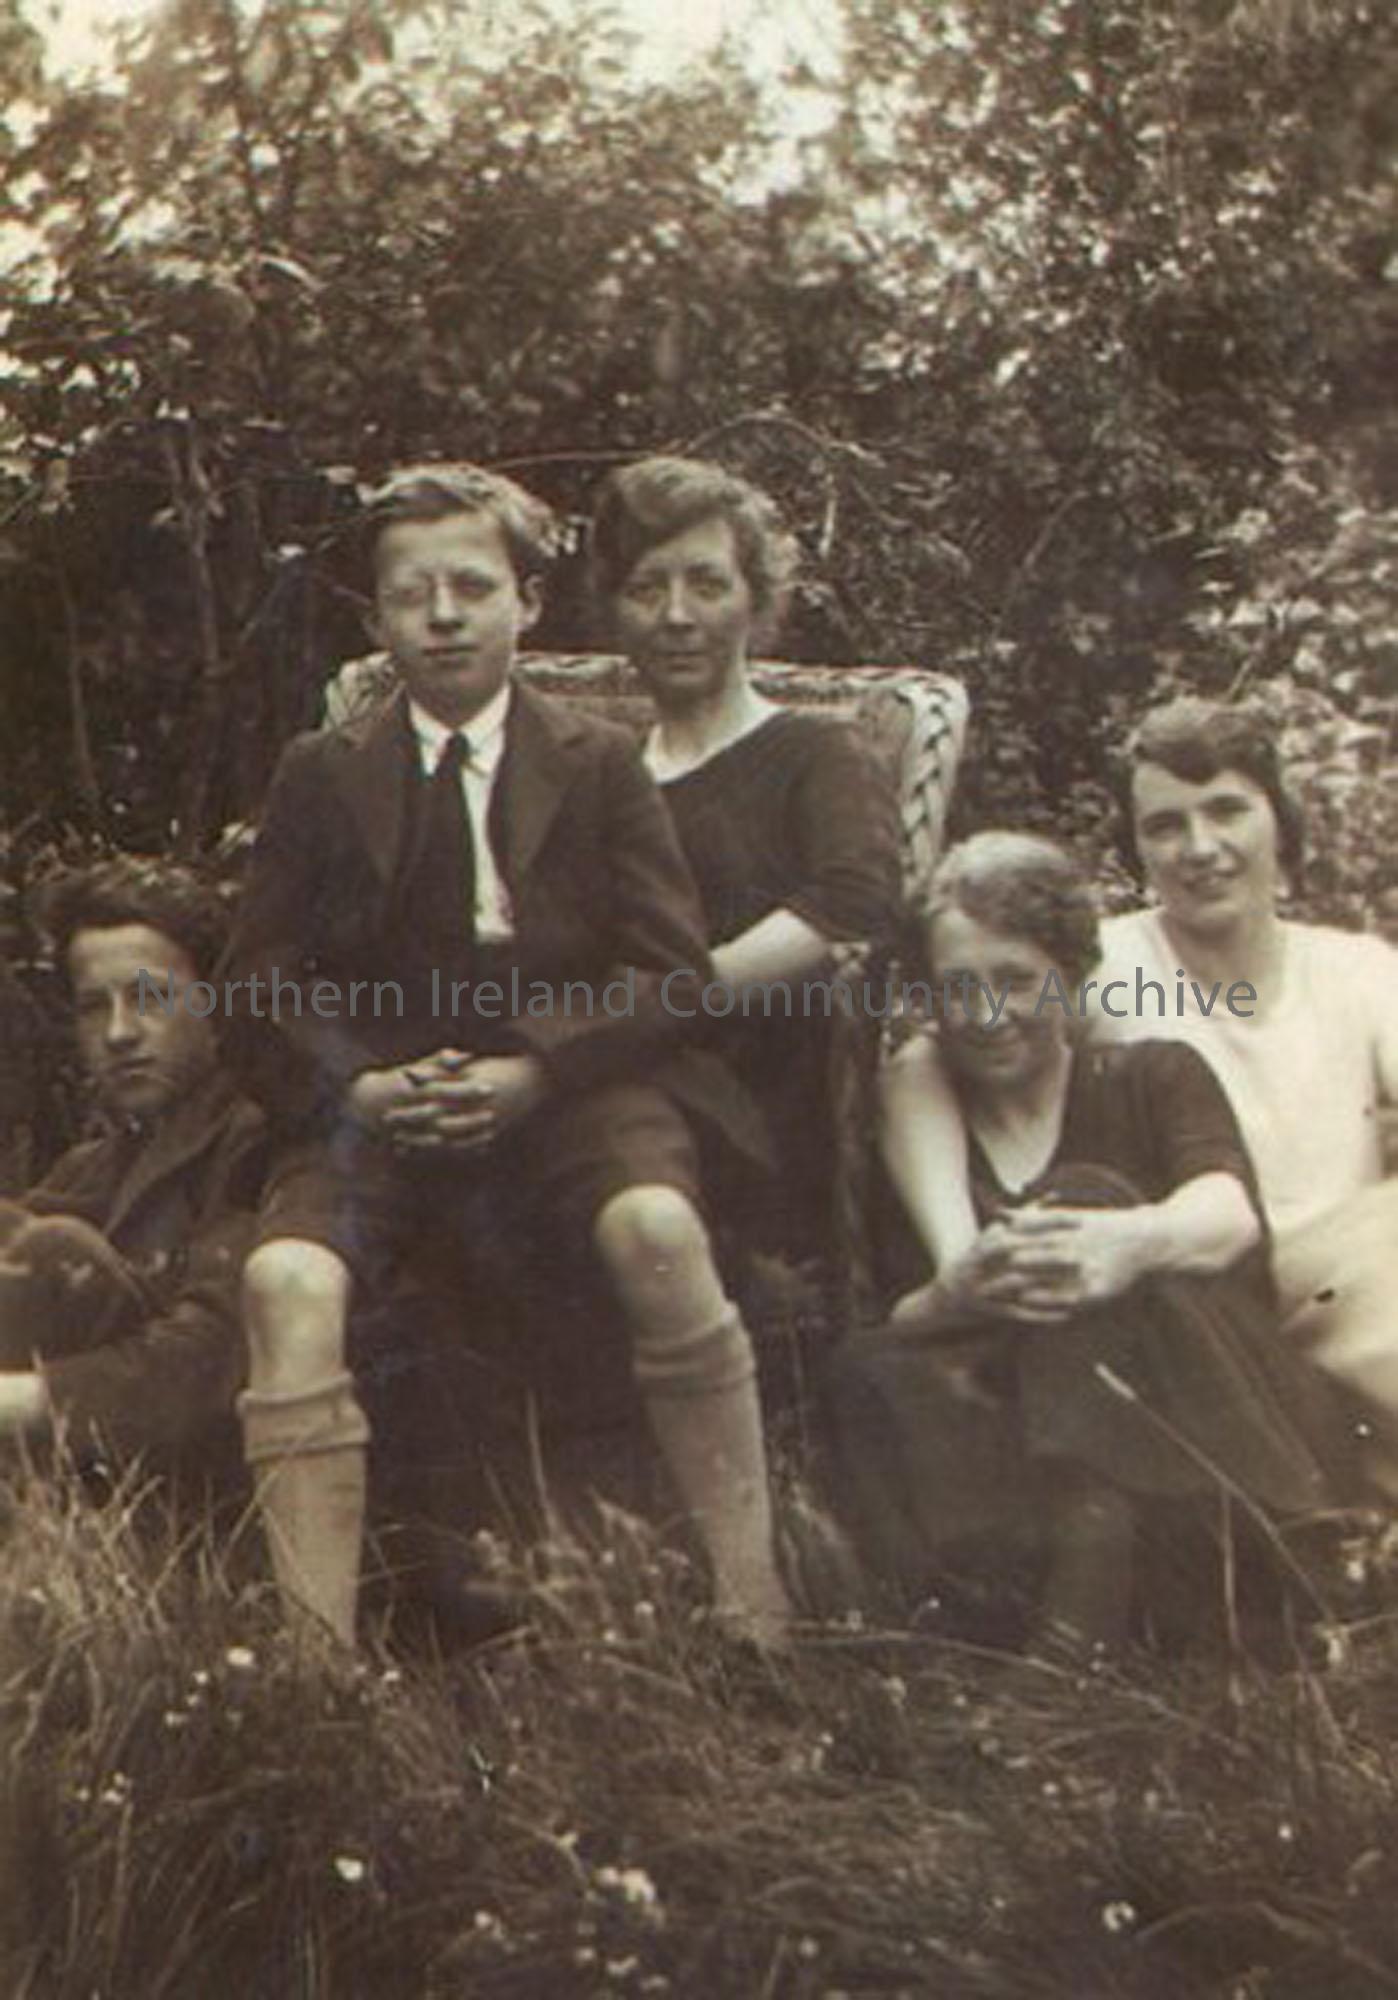 Photograph of James Noel Redpath, Isabella Redpath-nee Woodside, Kenneth Redpath and two unknown women.